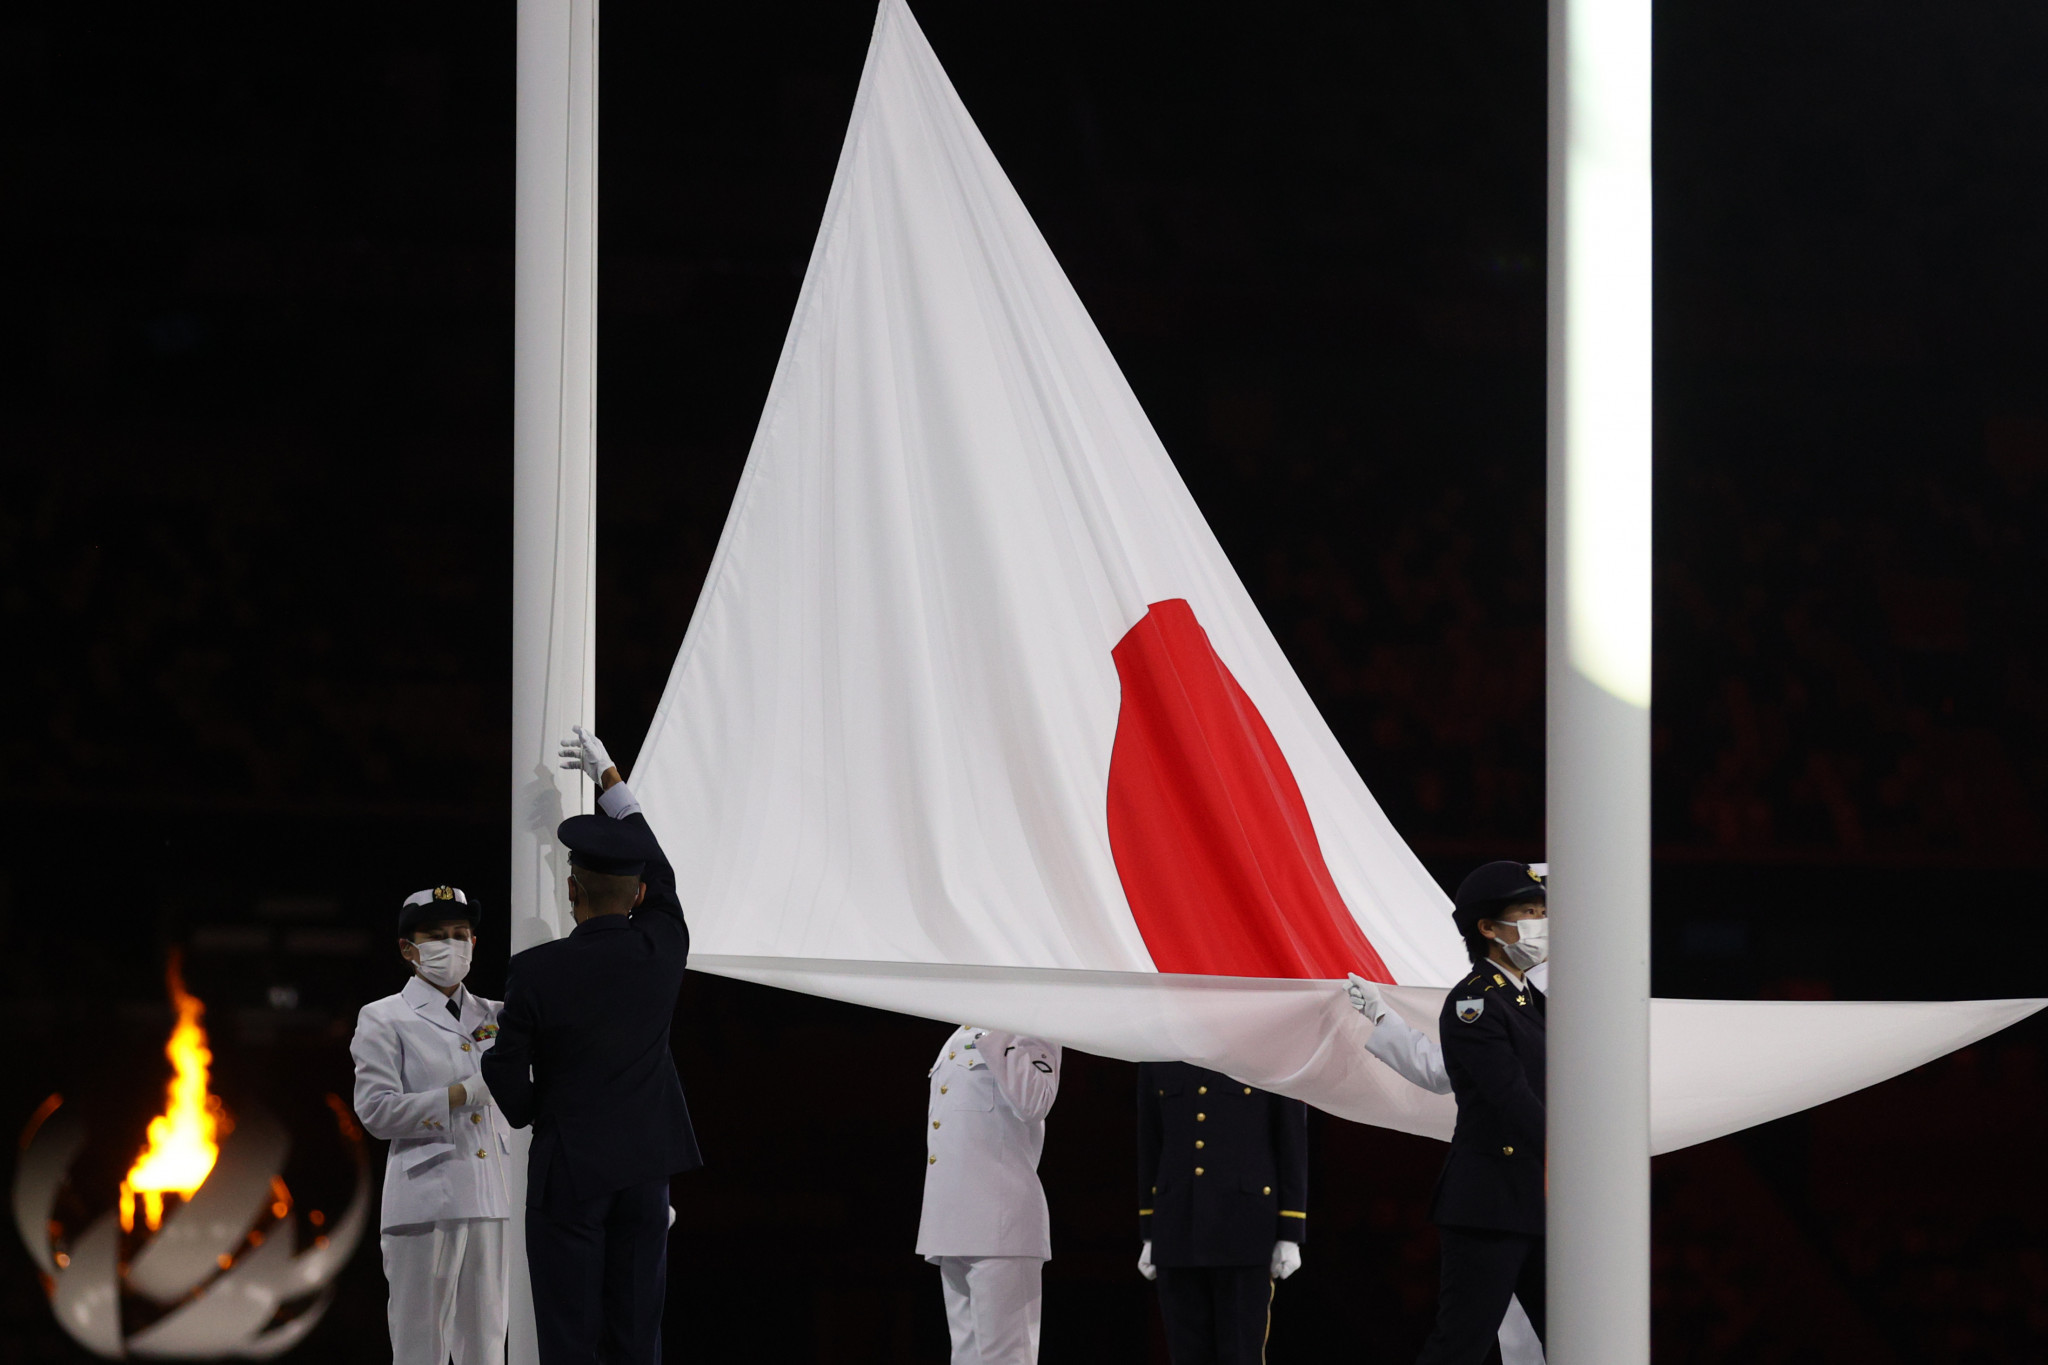 Tokyo is set to mark the anniversary of the Olympics with a series of commemorative events ©Getty Images